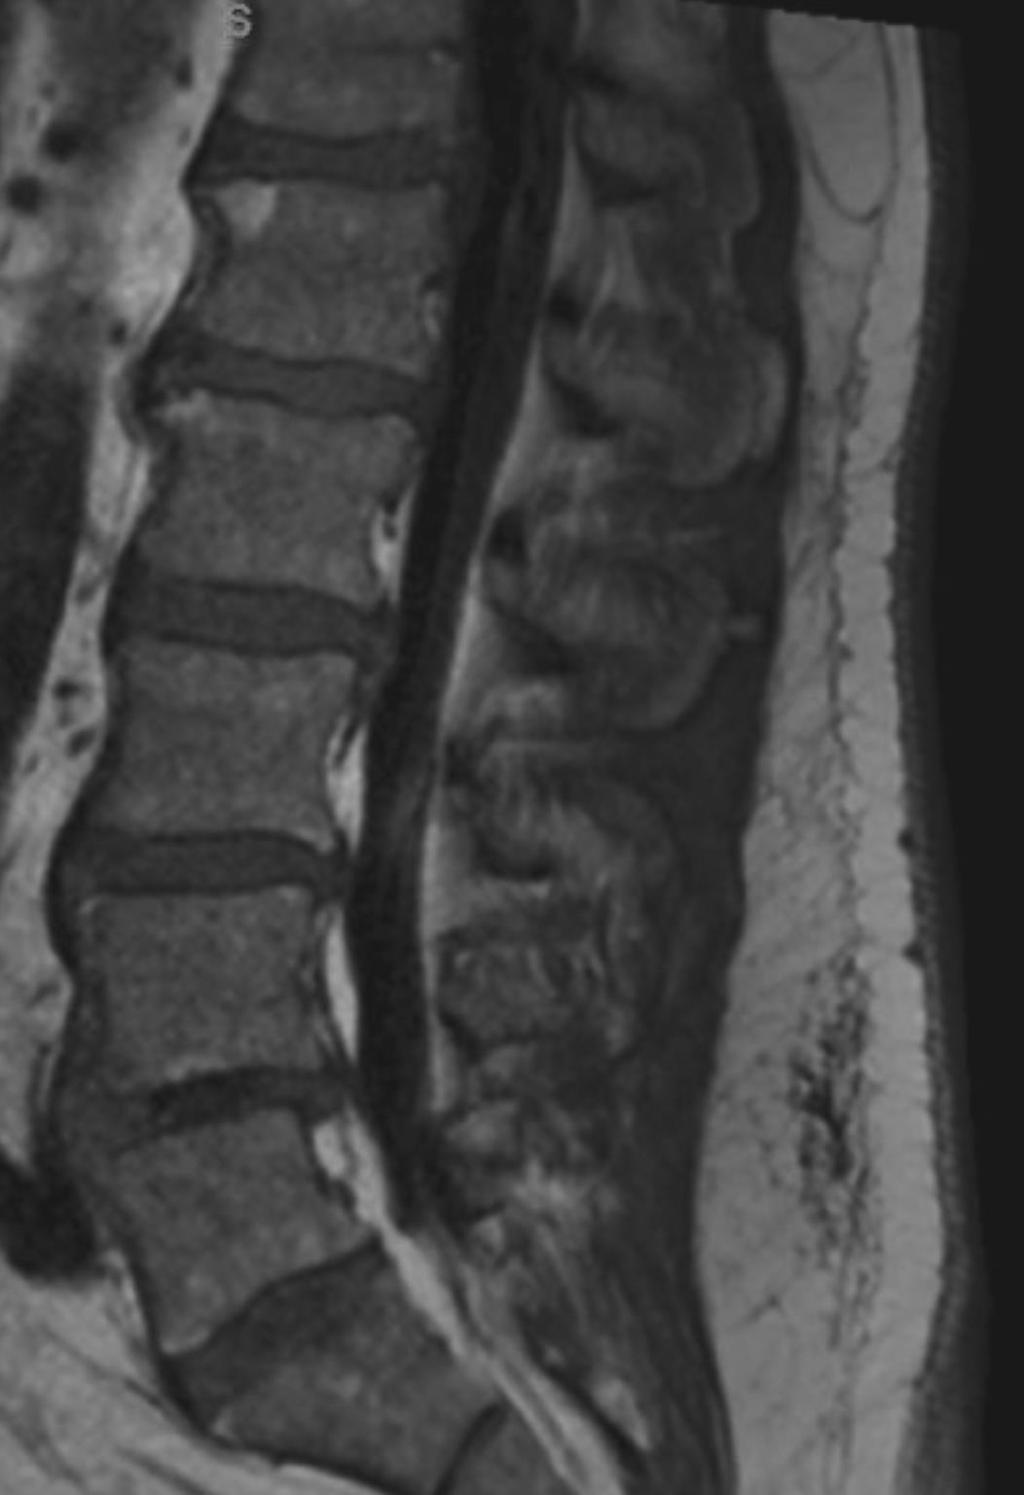 Dry Taps Causes Elderly patient Dehydration Spinal stenosis Narrowed IT space Clumping of nerve roots Epidural lipomatosis Narrowed IT space Solutions Re-insert stylet and withdraw again